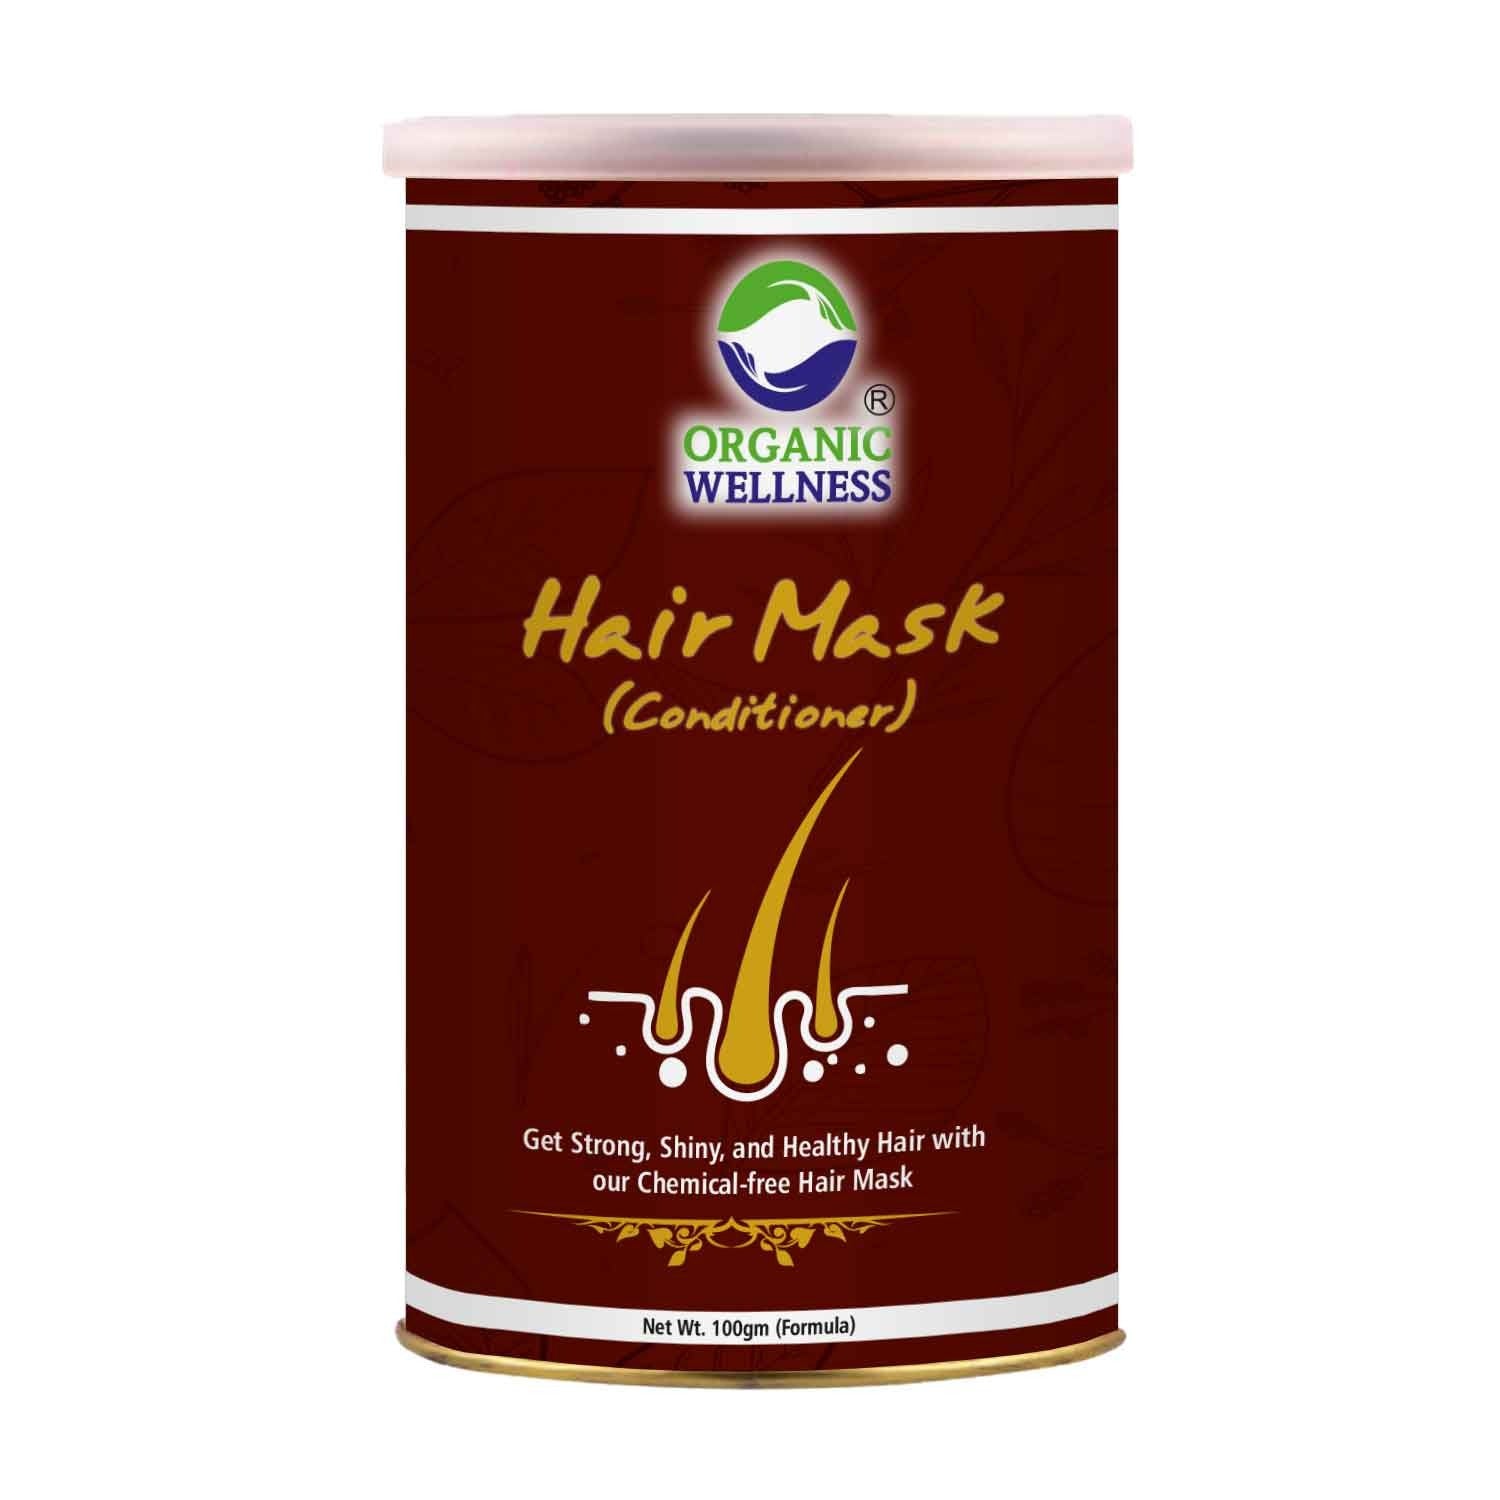 HAIR MASK (CONDITIONER)